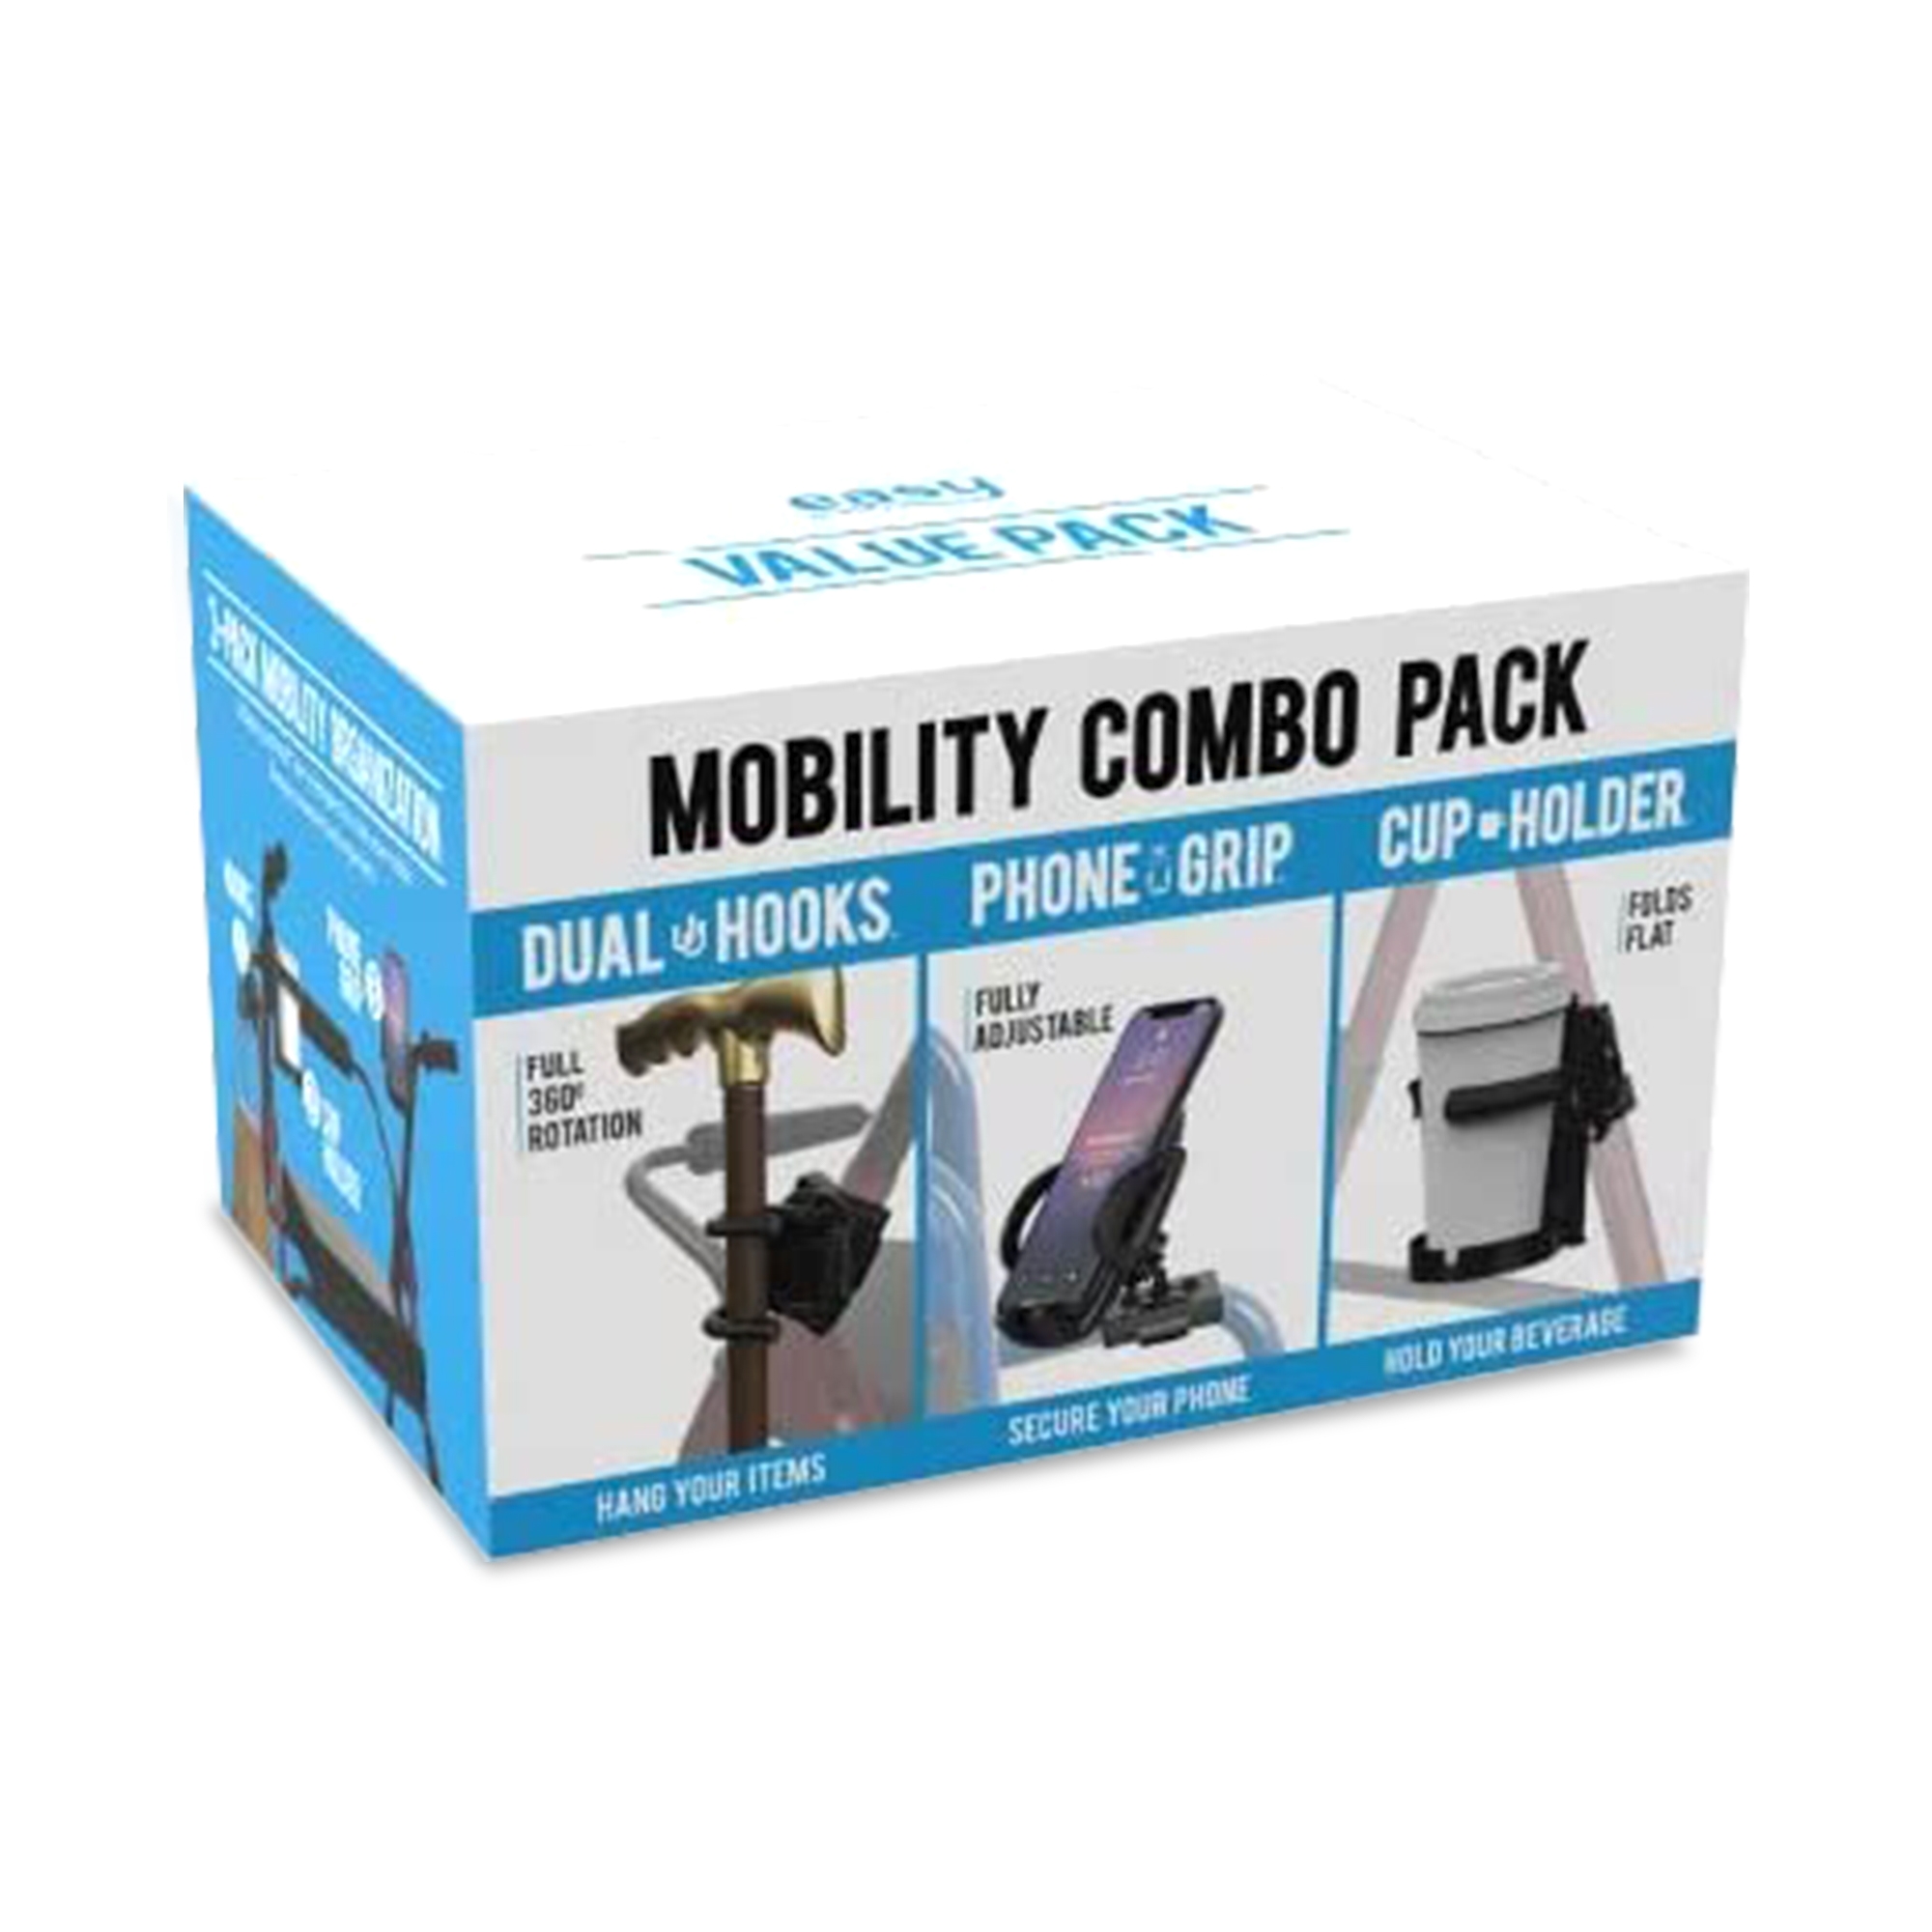 Mobility Combo Pack : Cup Holder, Phone Grip and Hooks